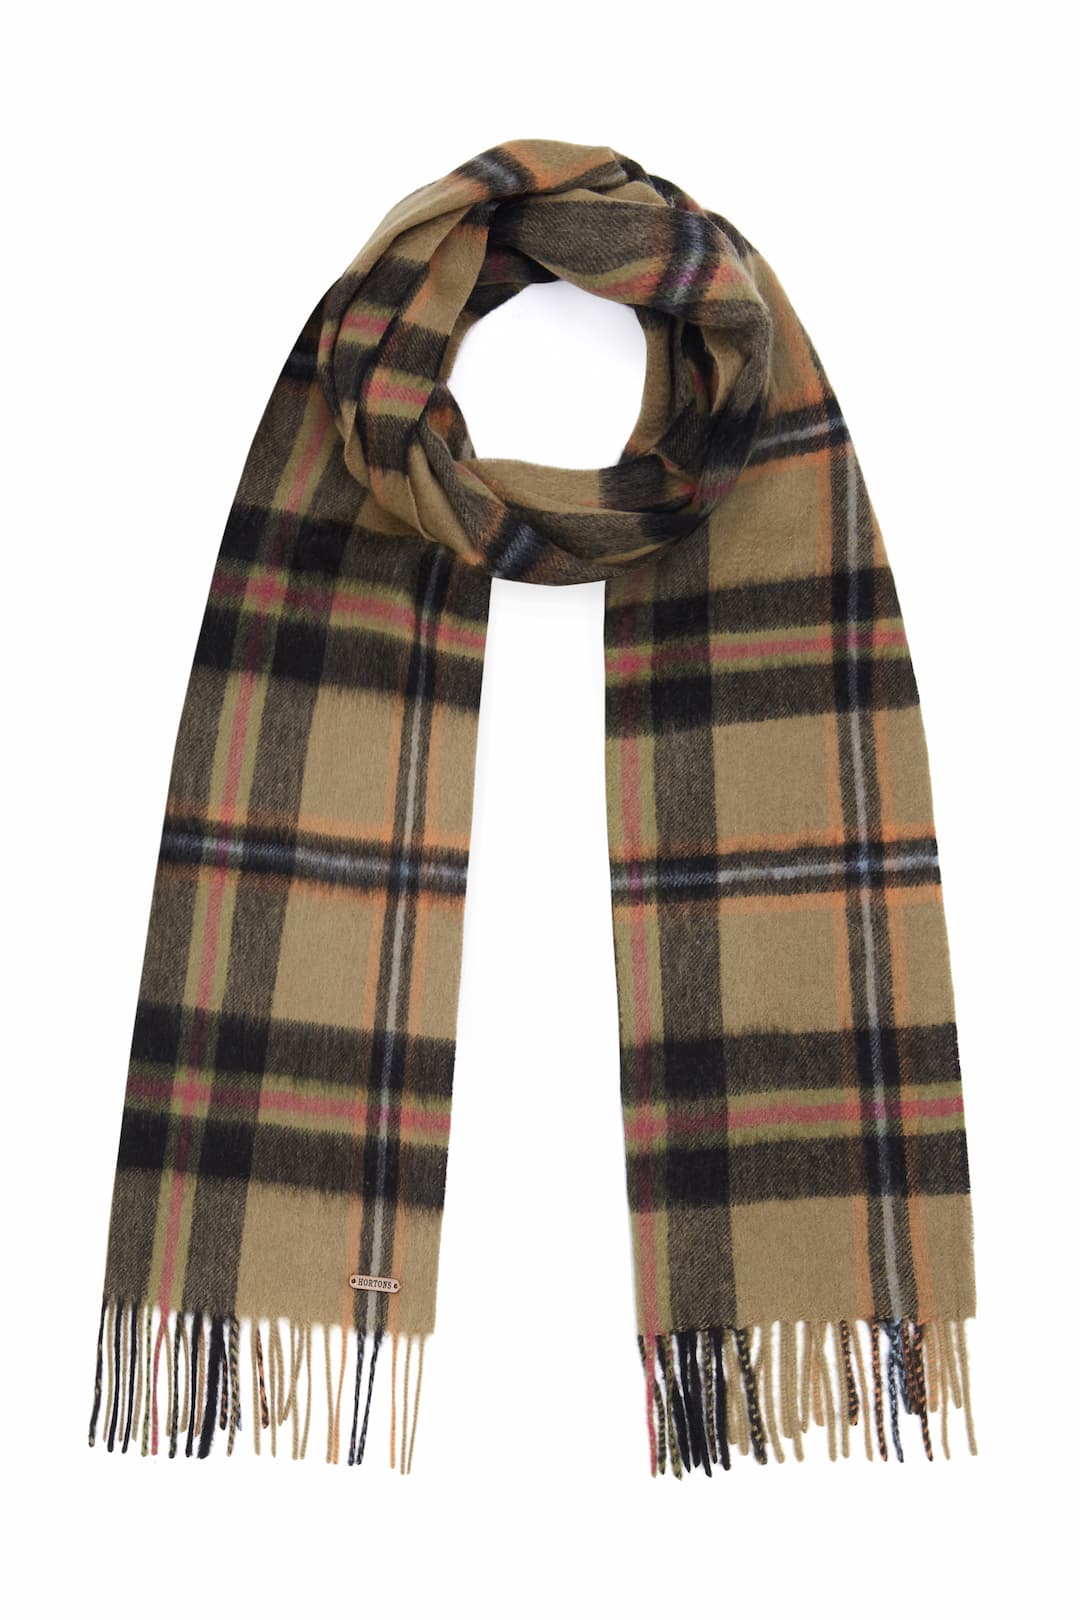 Hortons England -  100% Lambswool Checked Scarf - Black Check 